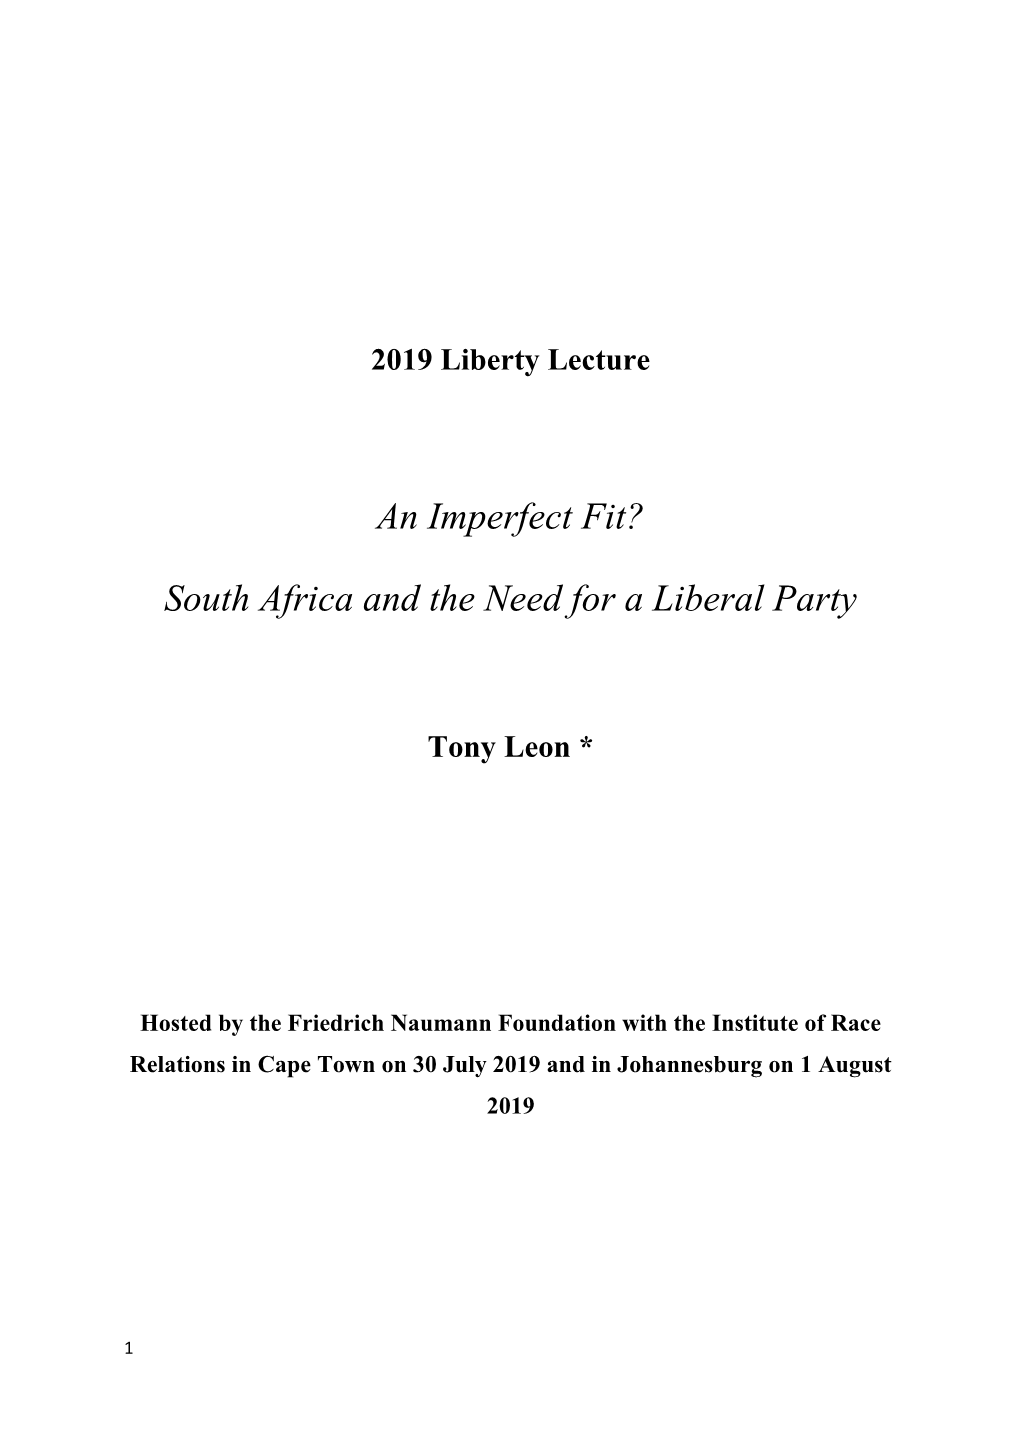 South Africa and the Need for a Liberal Party